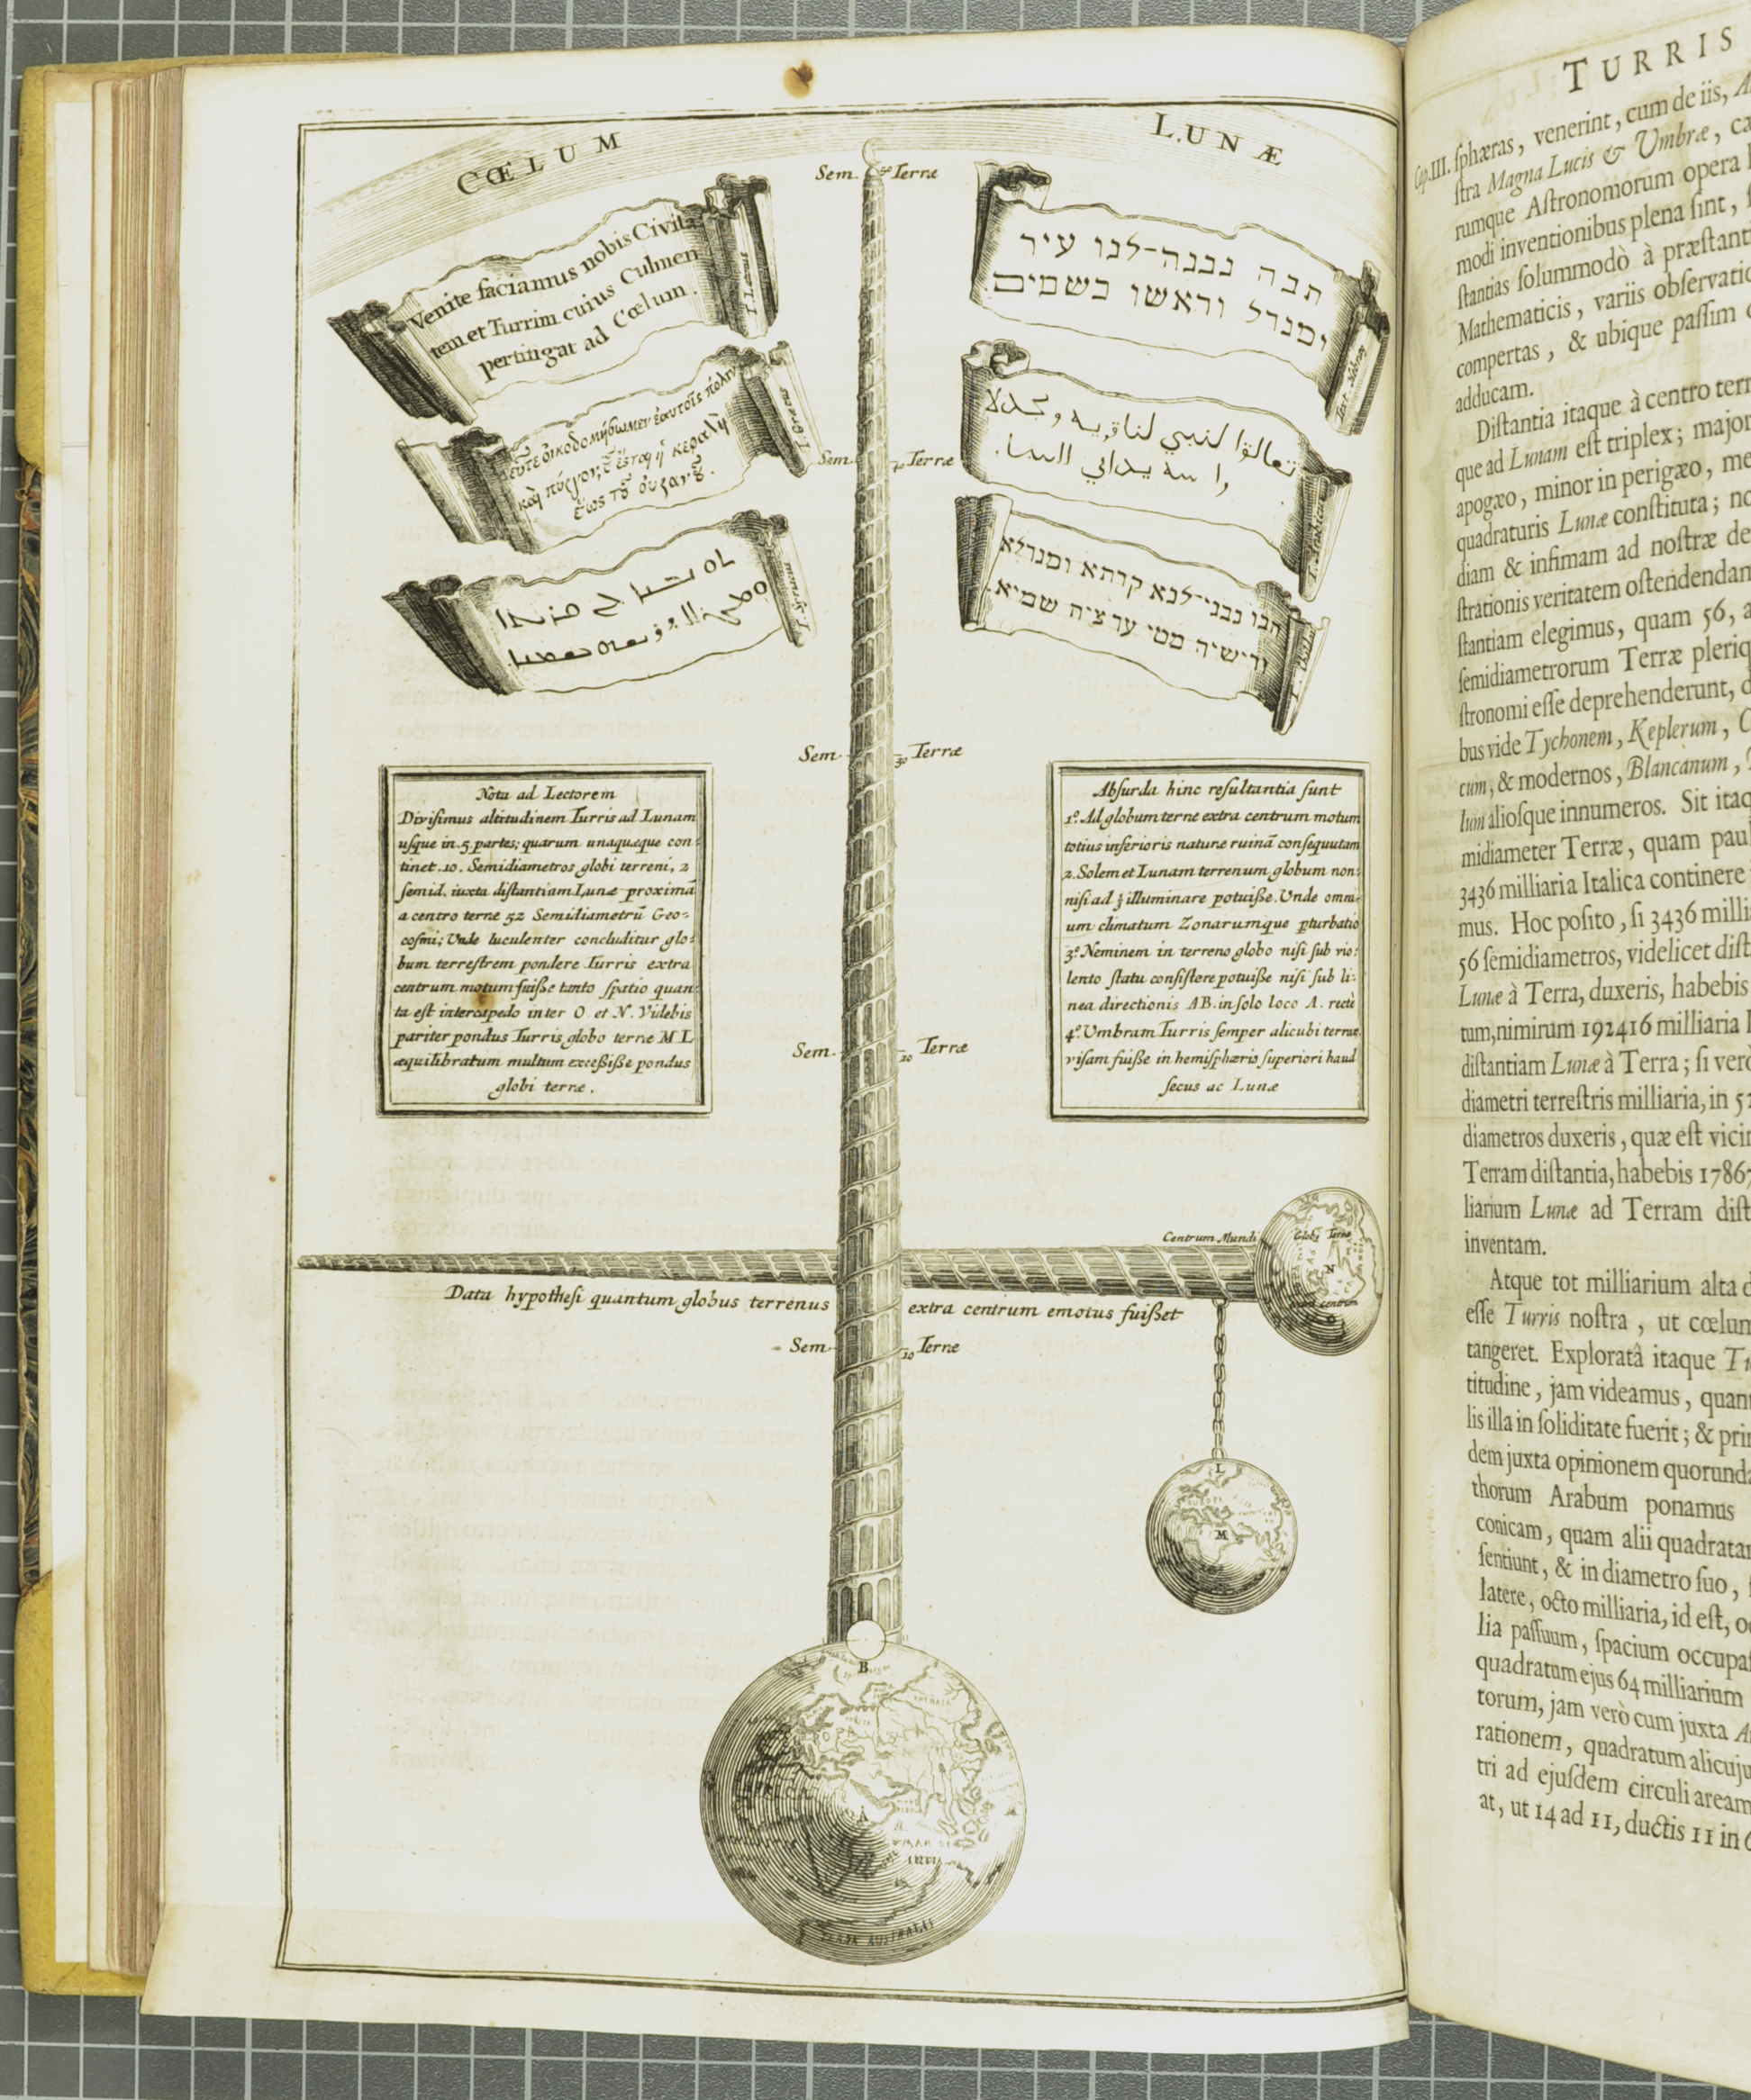 A visualisation of Kircher's reasoning for why the Tower of Babel could never reach the moon. From his Turris Babel, 1679 (St Andrews copy at r17f BS1238.B2K5)